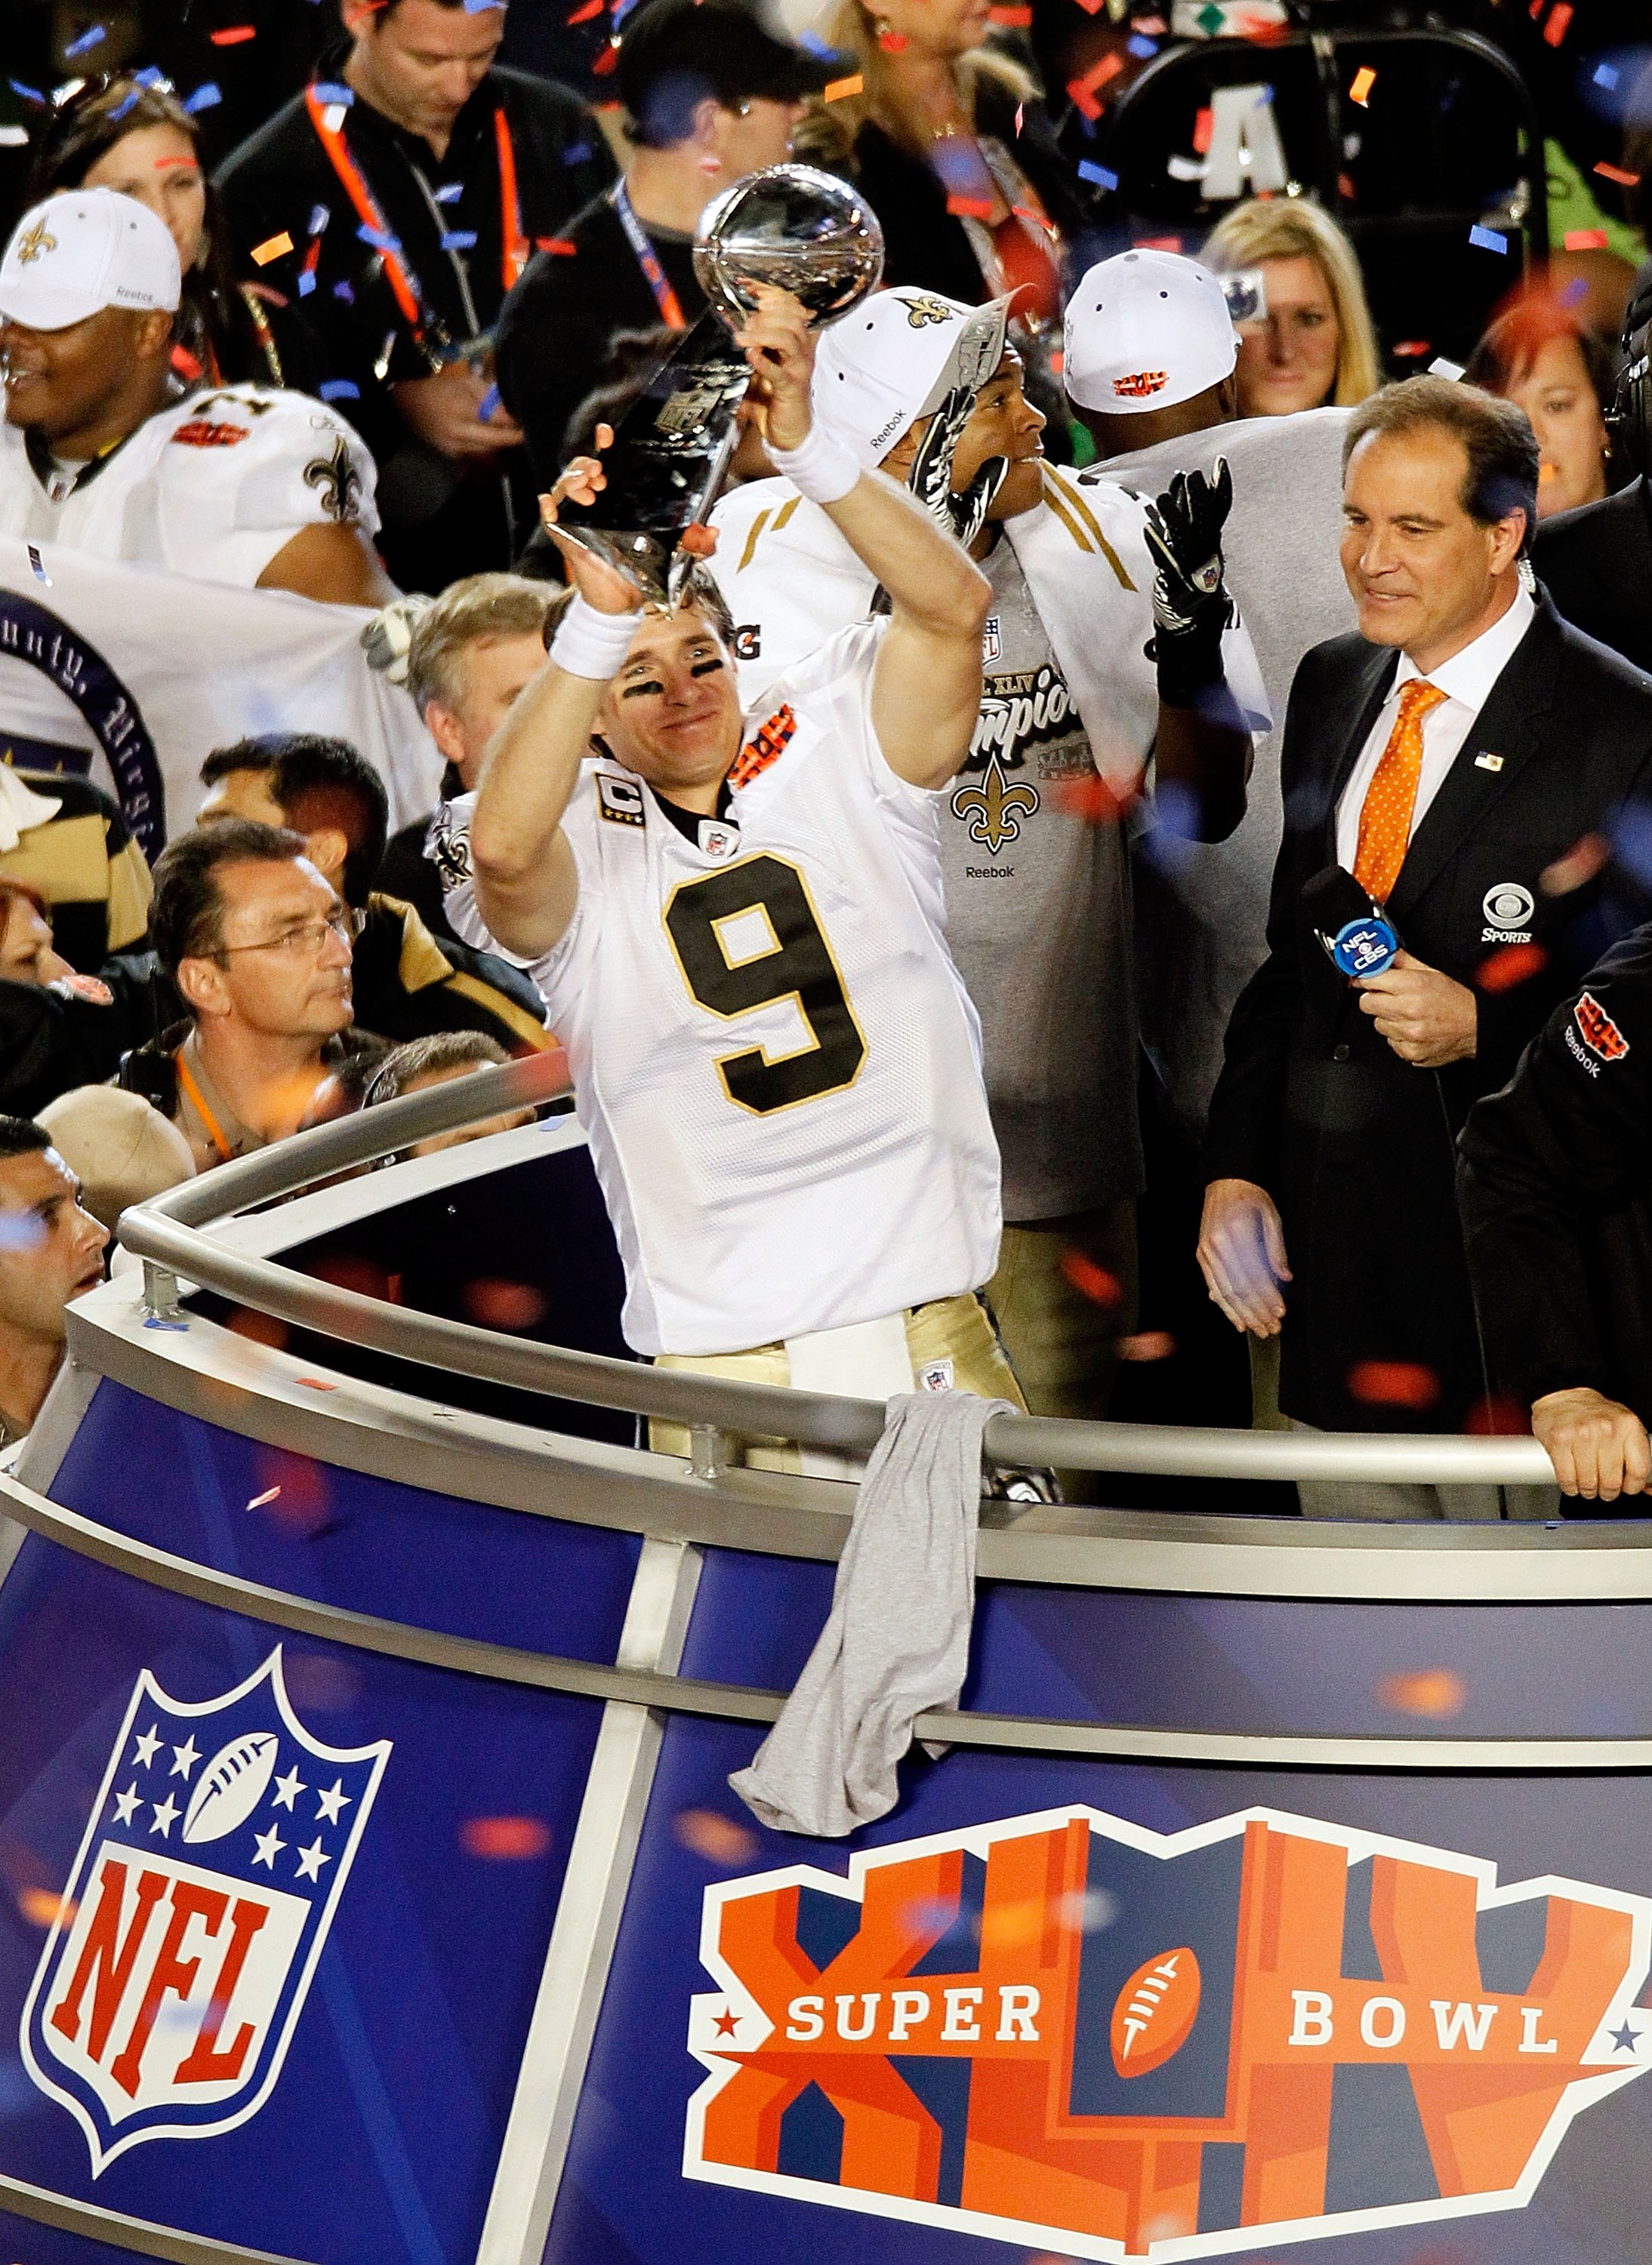 ThreePeat Can Drew Brees Lead the NFL in Passing Touchdowns Yet Again